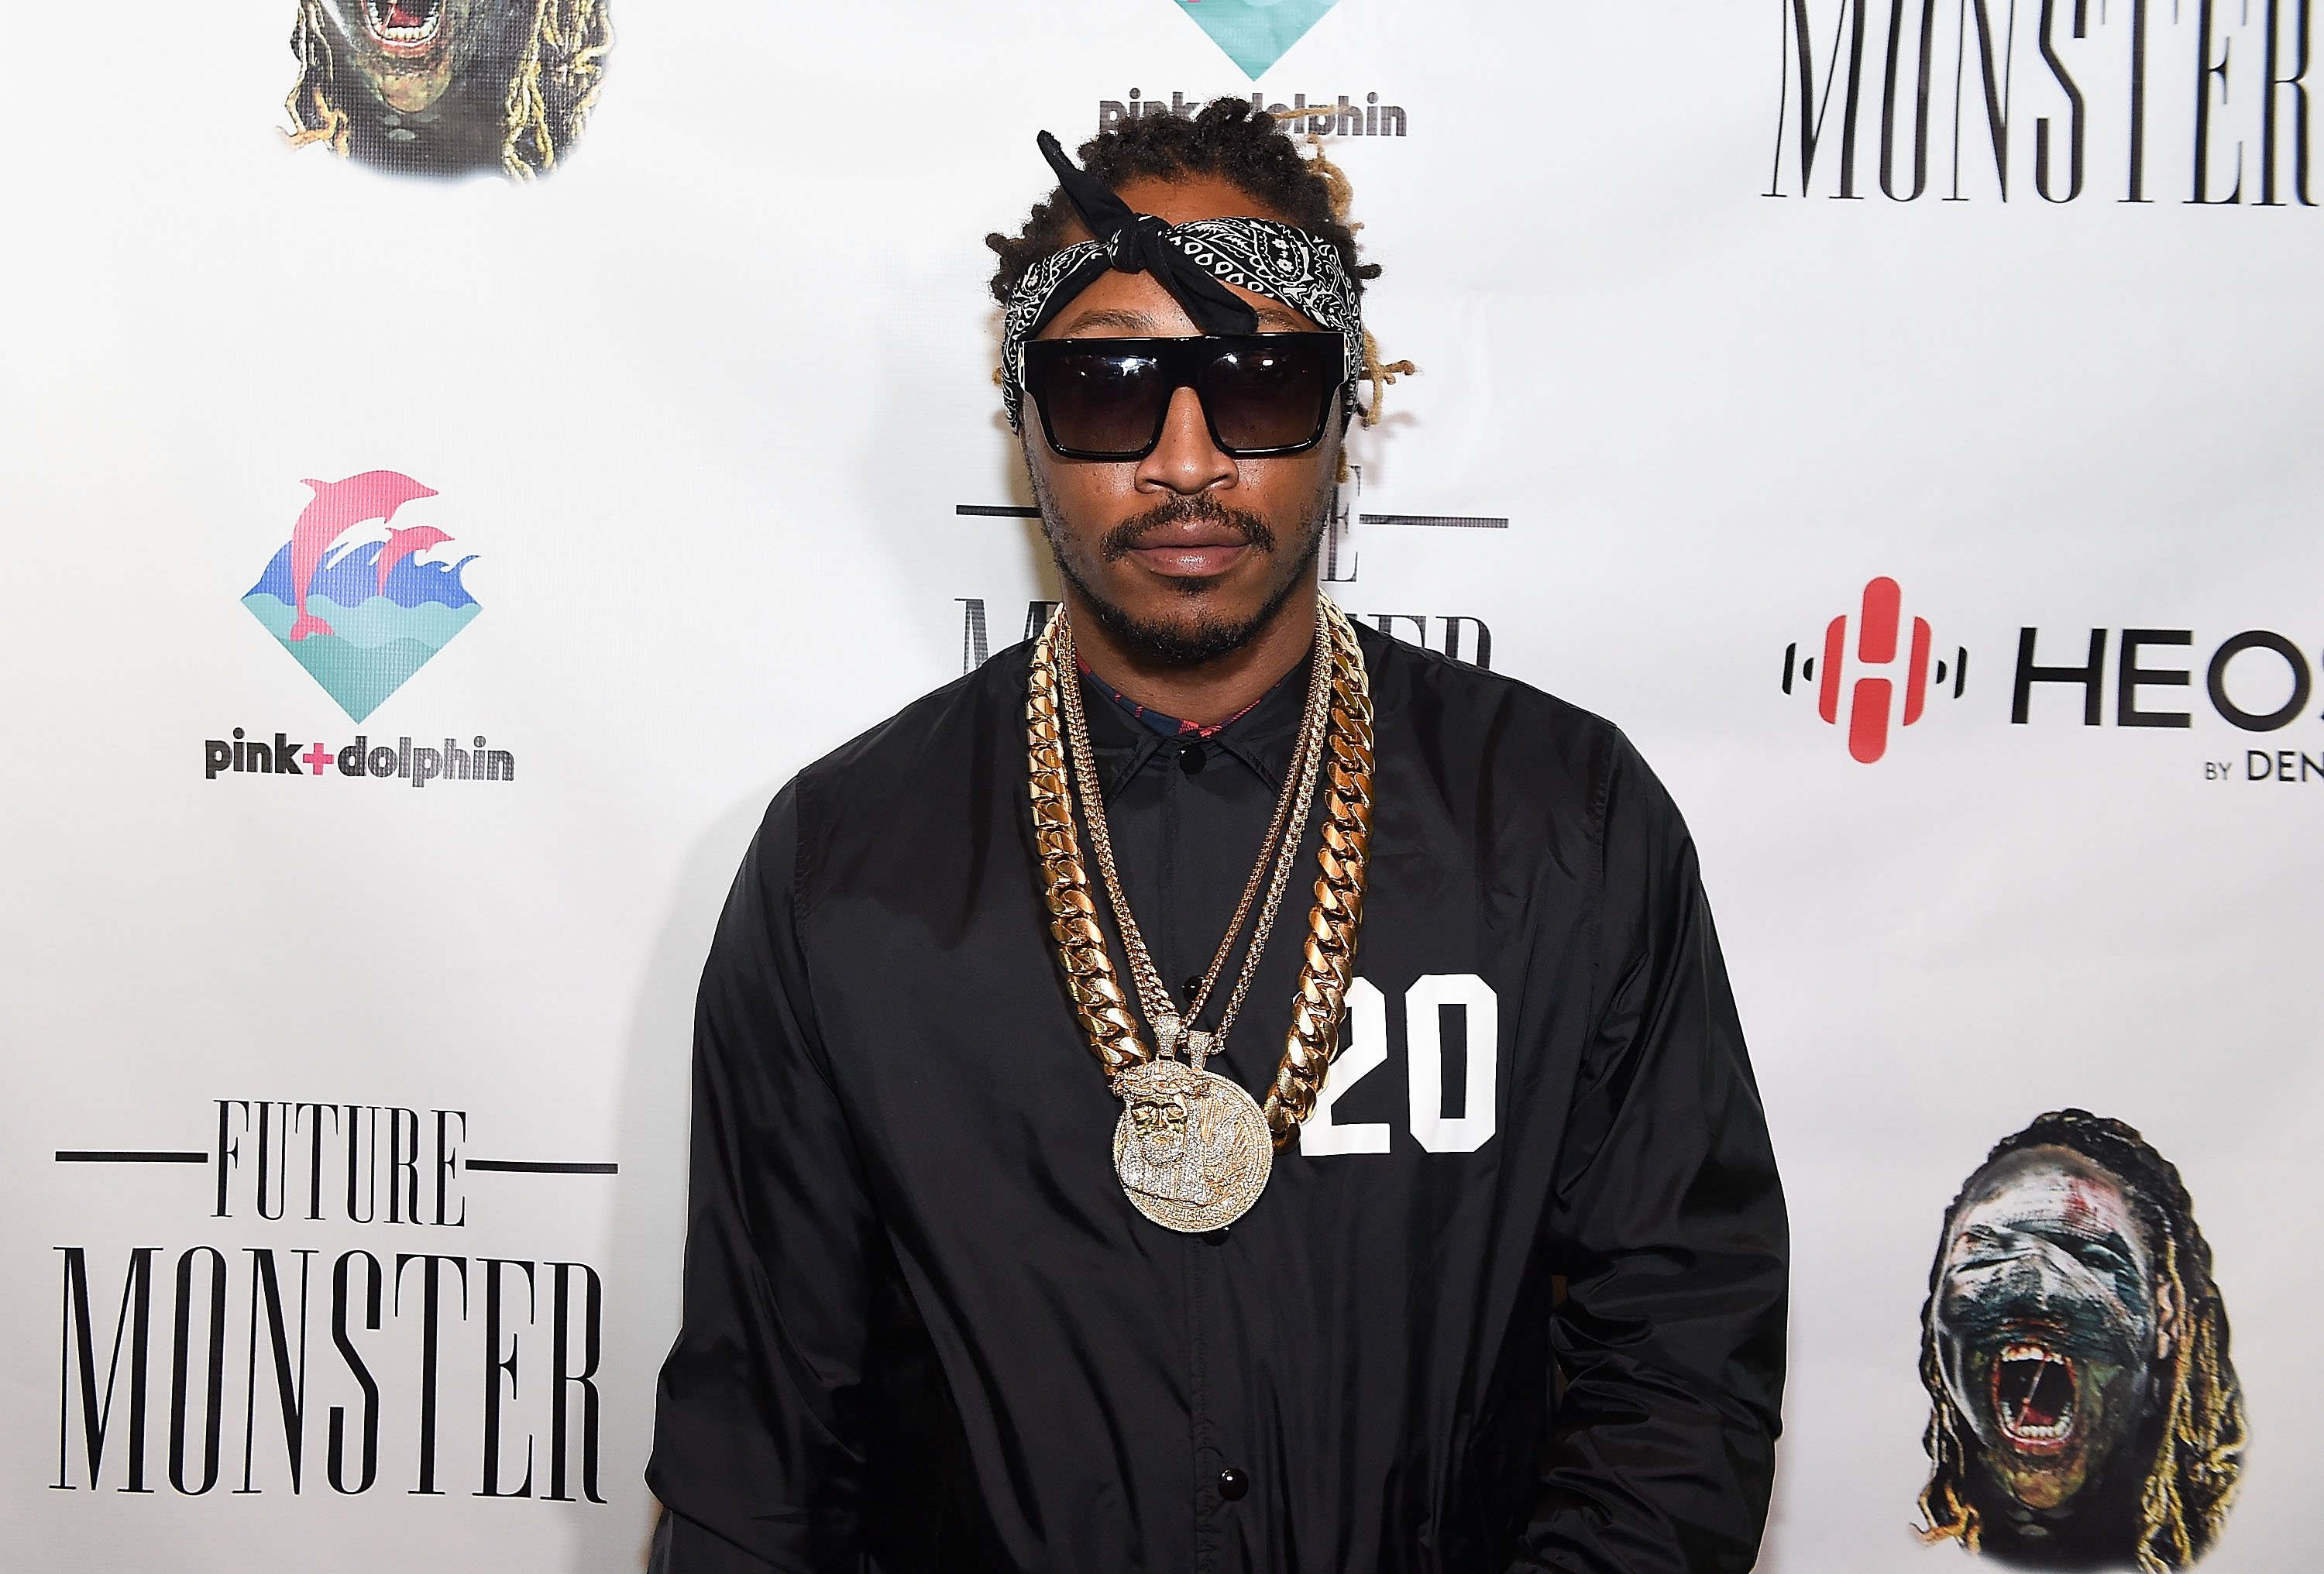 Rapper Future attending the Future Monster Halloween Costume Party in Georgia in October 2014. | Photo: Getty Images